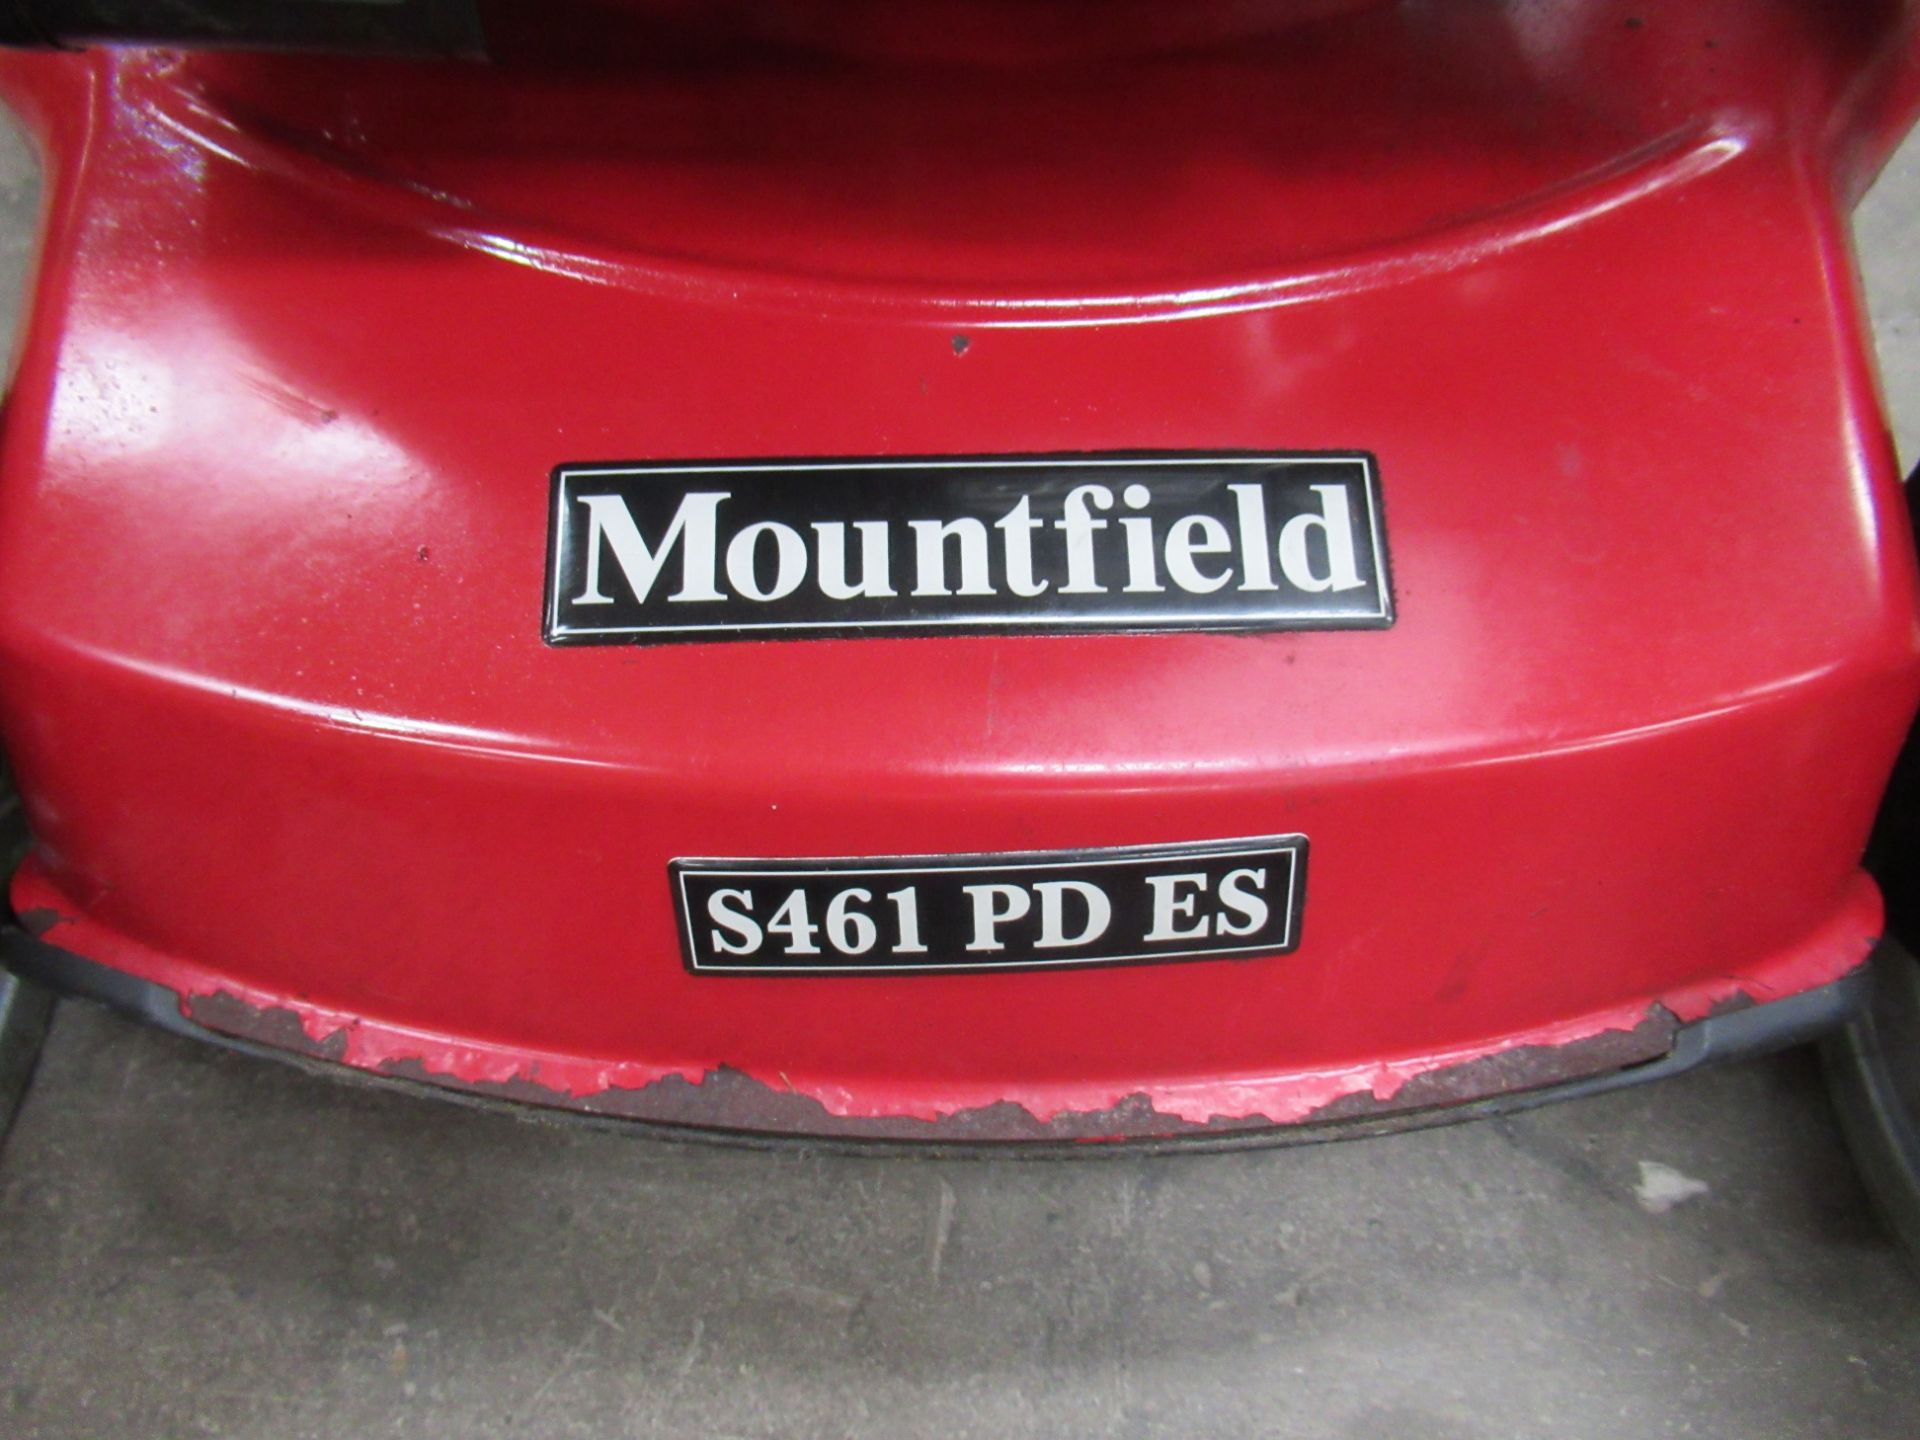 Mountfield Rotary S461PDES Self-Proppelled Lawnmower - Bild 6 aus 6